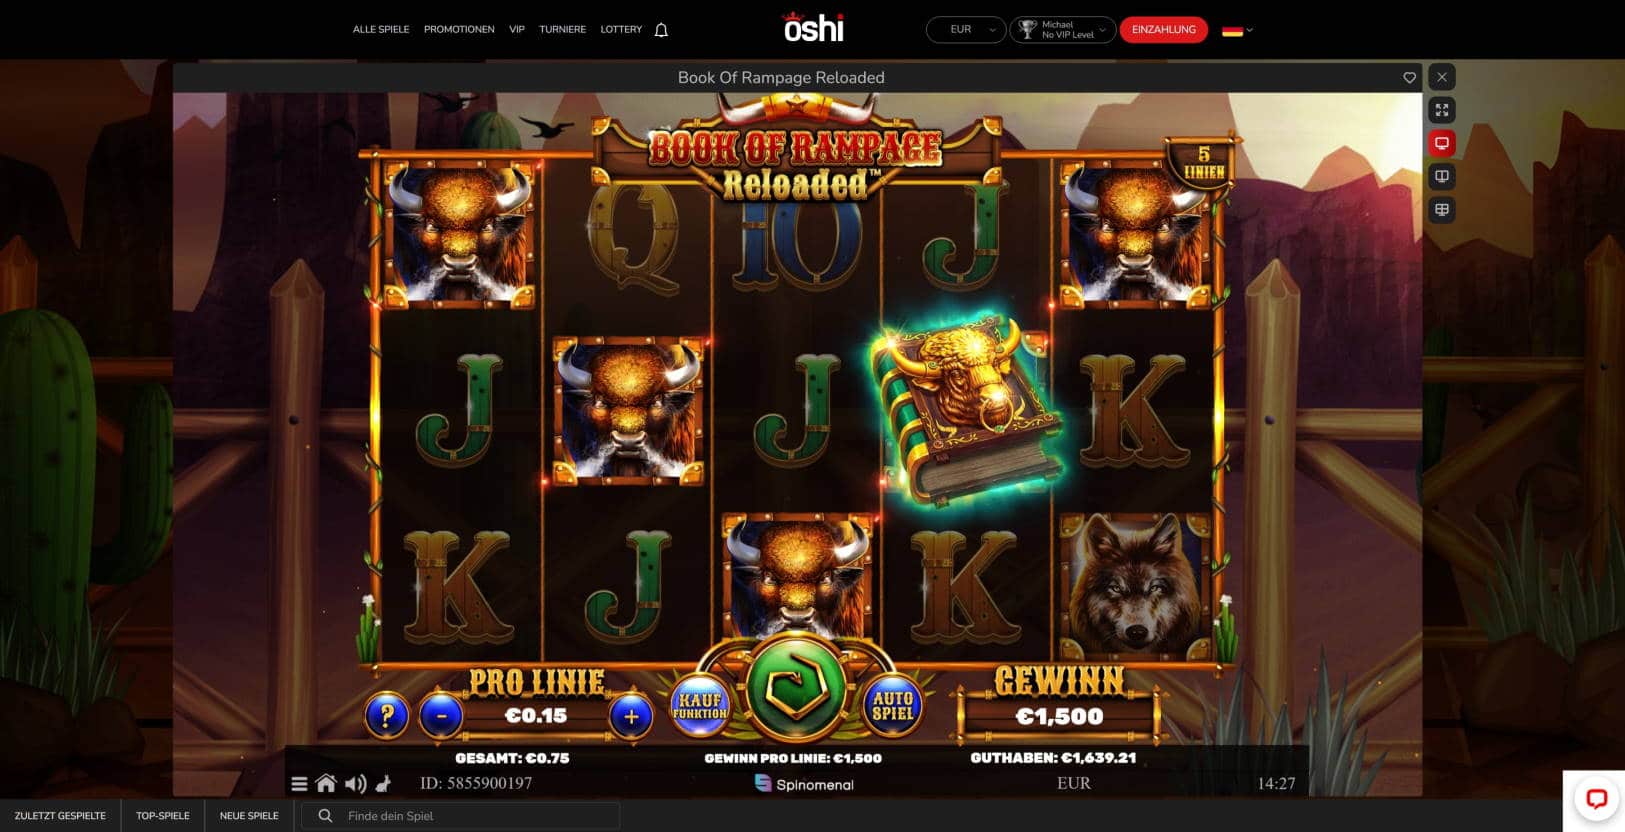 Book of Rampage Reloaded Casino win picture by michaeltime 15.4.2022 1500e 2000X Oshi